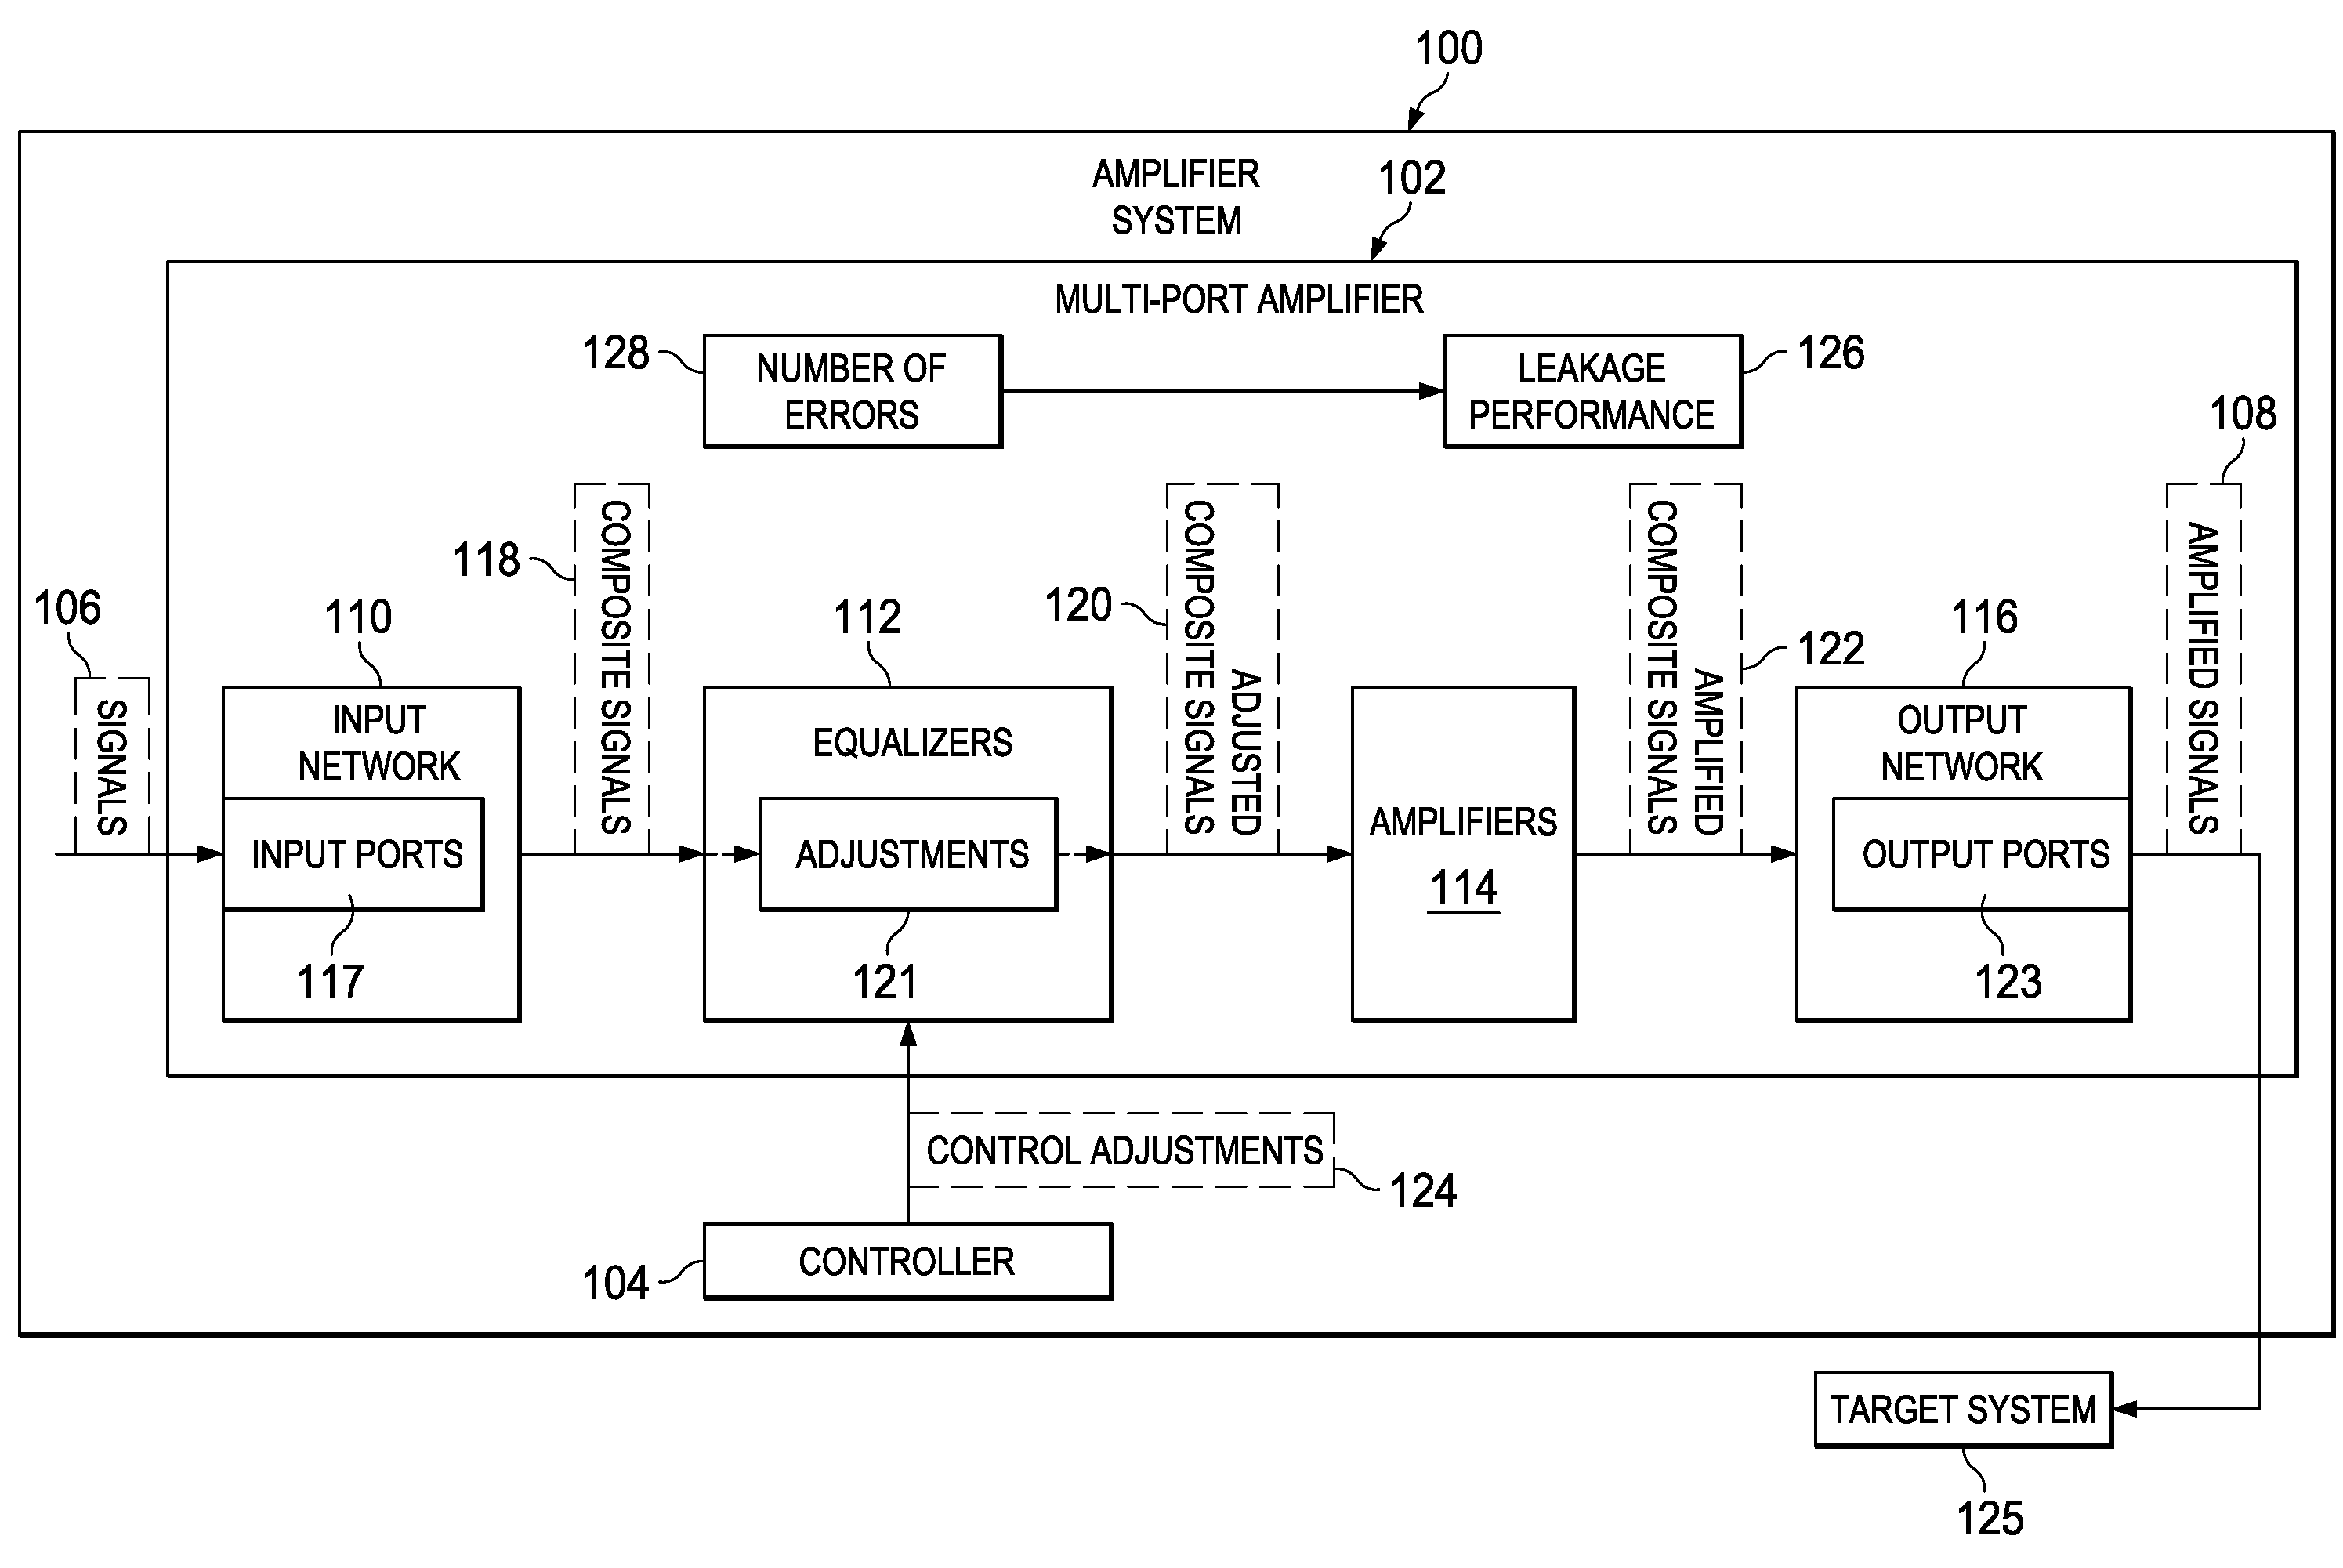 Method and Apparatus for Improving Leakage Performance of a Multi-Port Amplifier